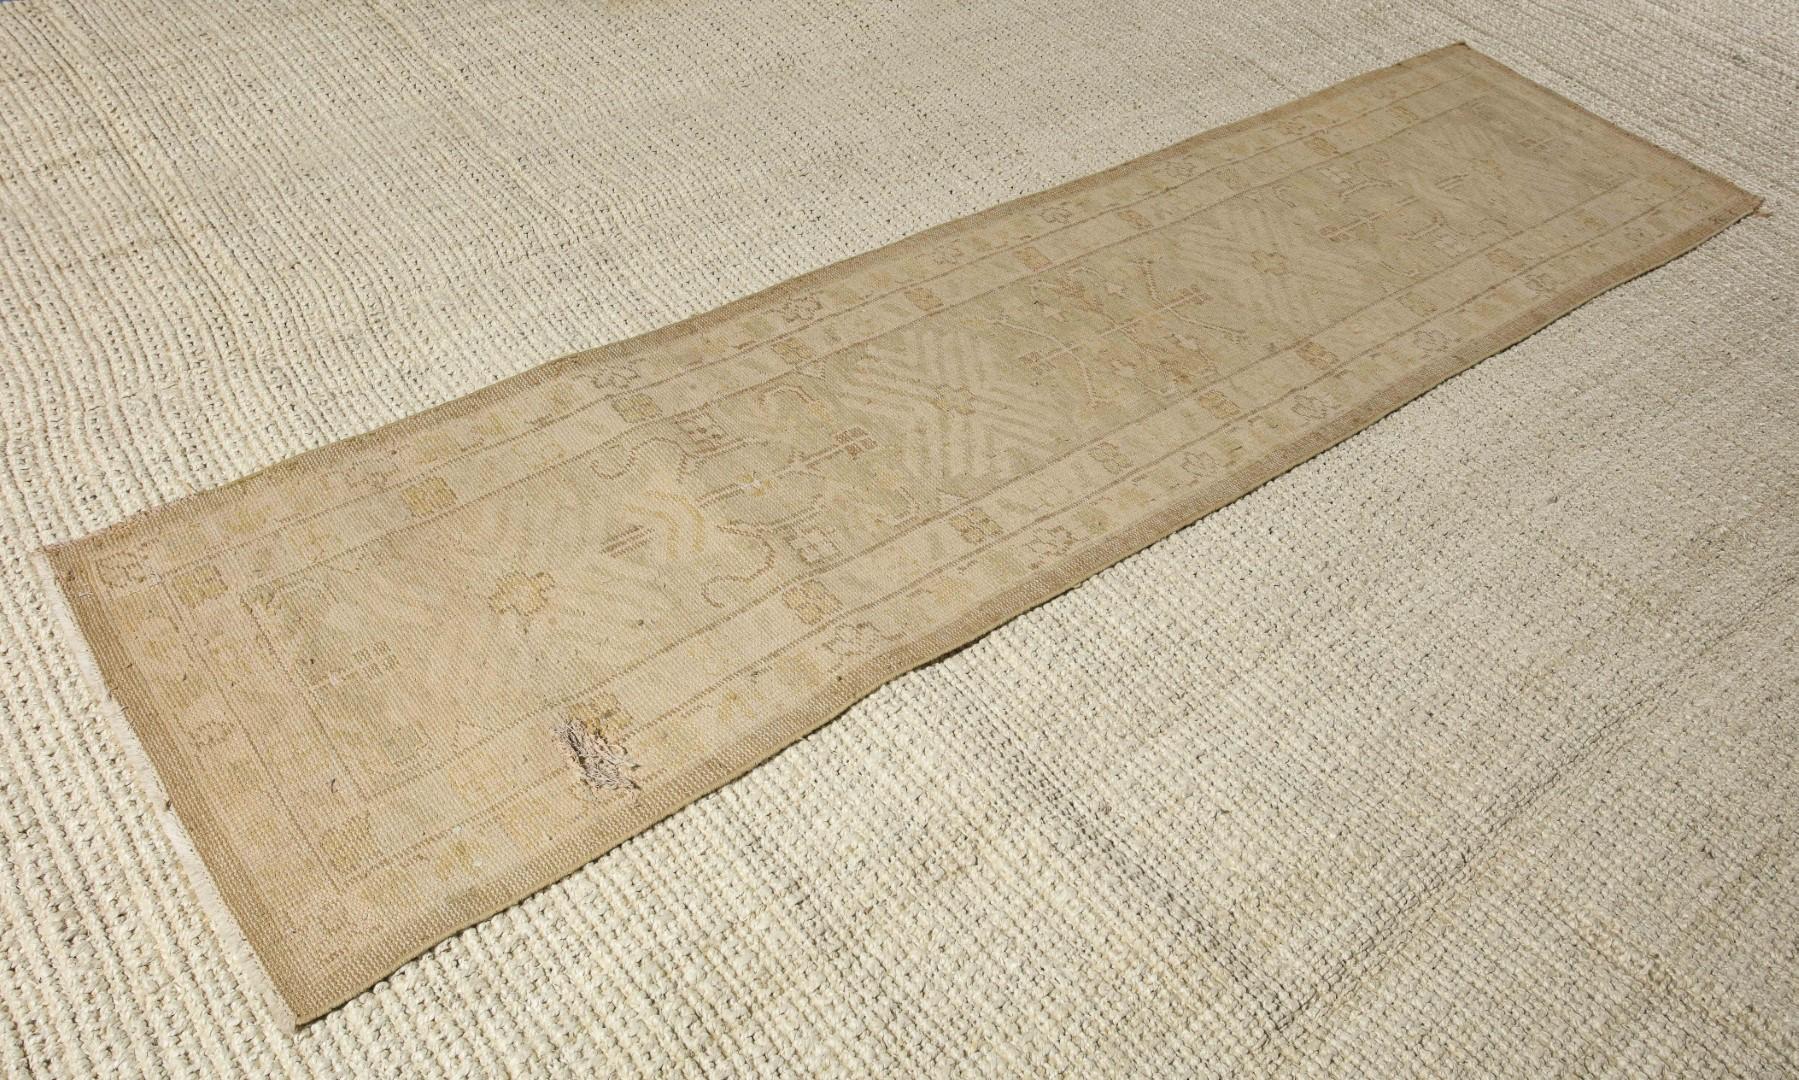 20th century natural, cream and beige toned Turkish Oushak runner. Short fringe on either end. One hole in the runner.